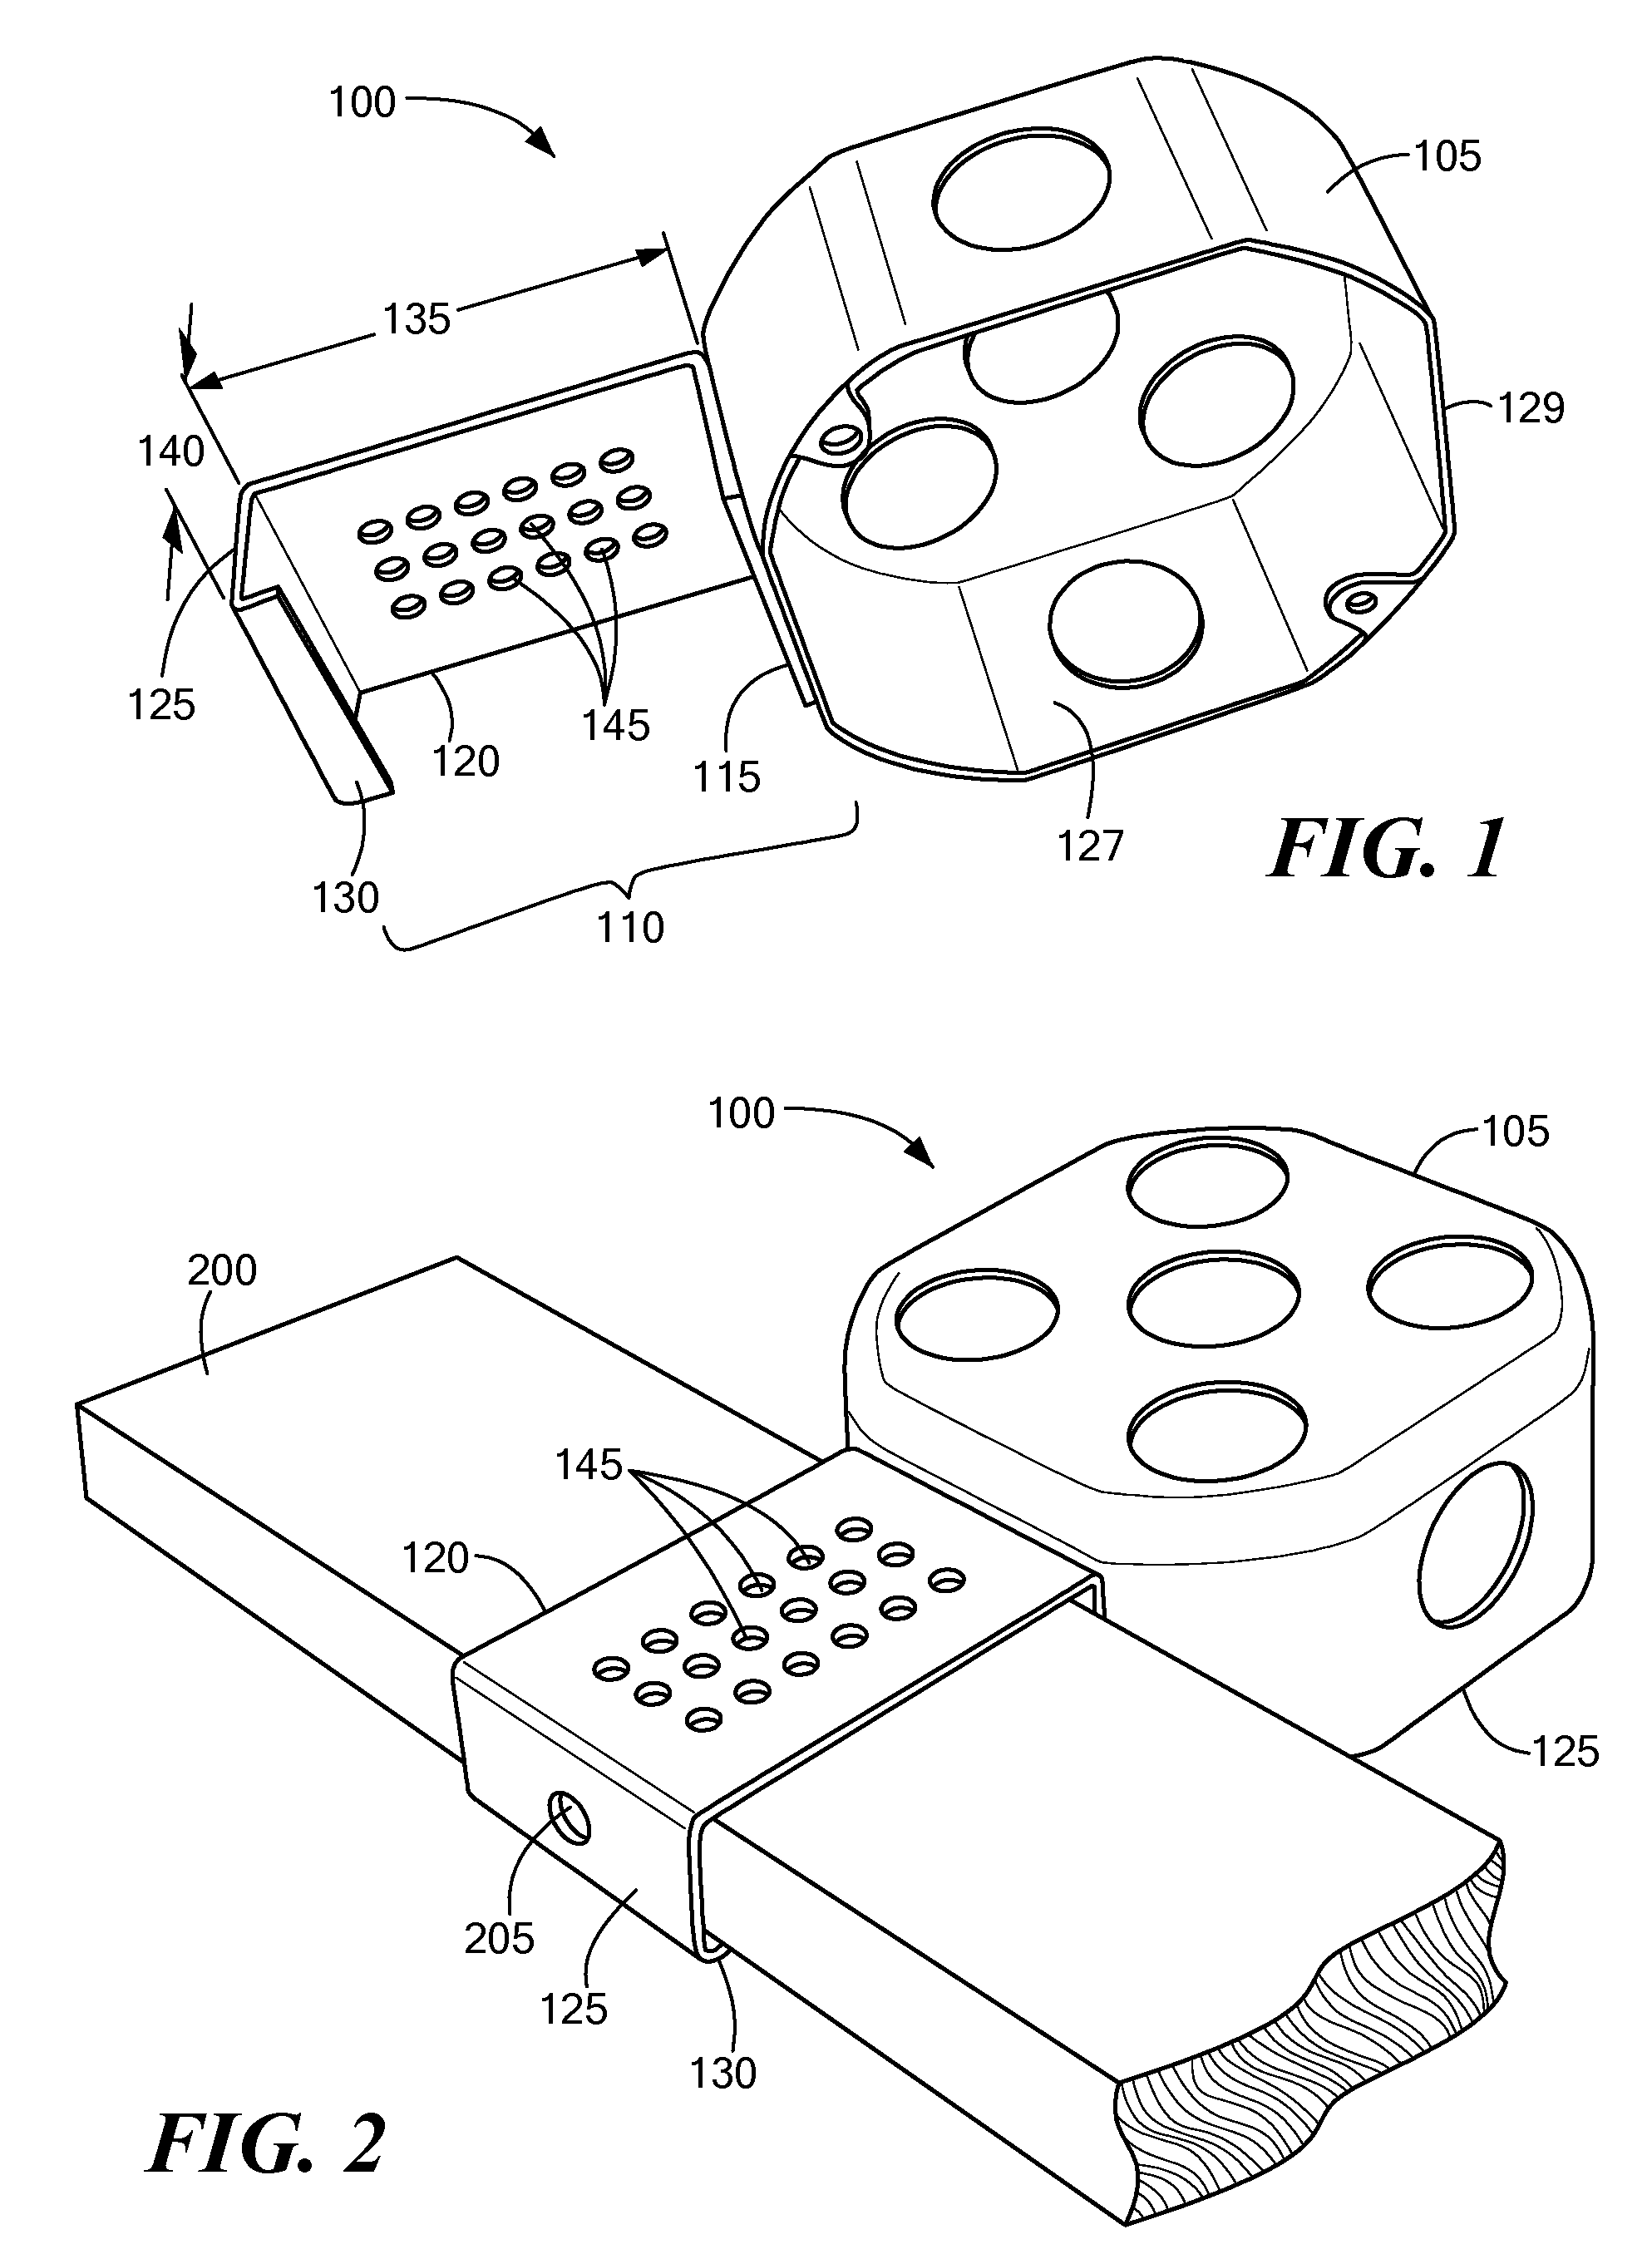 Mounting bracket for electrical junction box, luminaire or the like